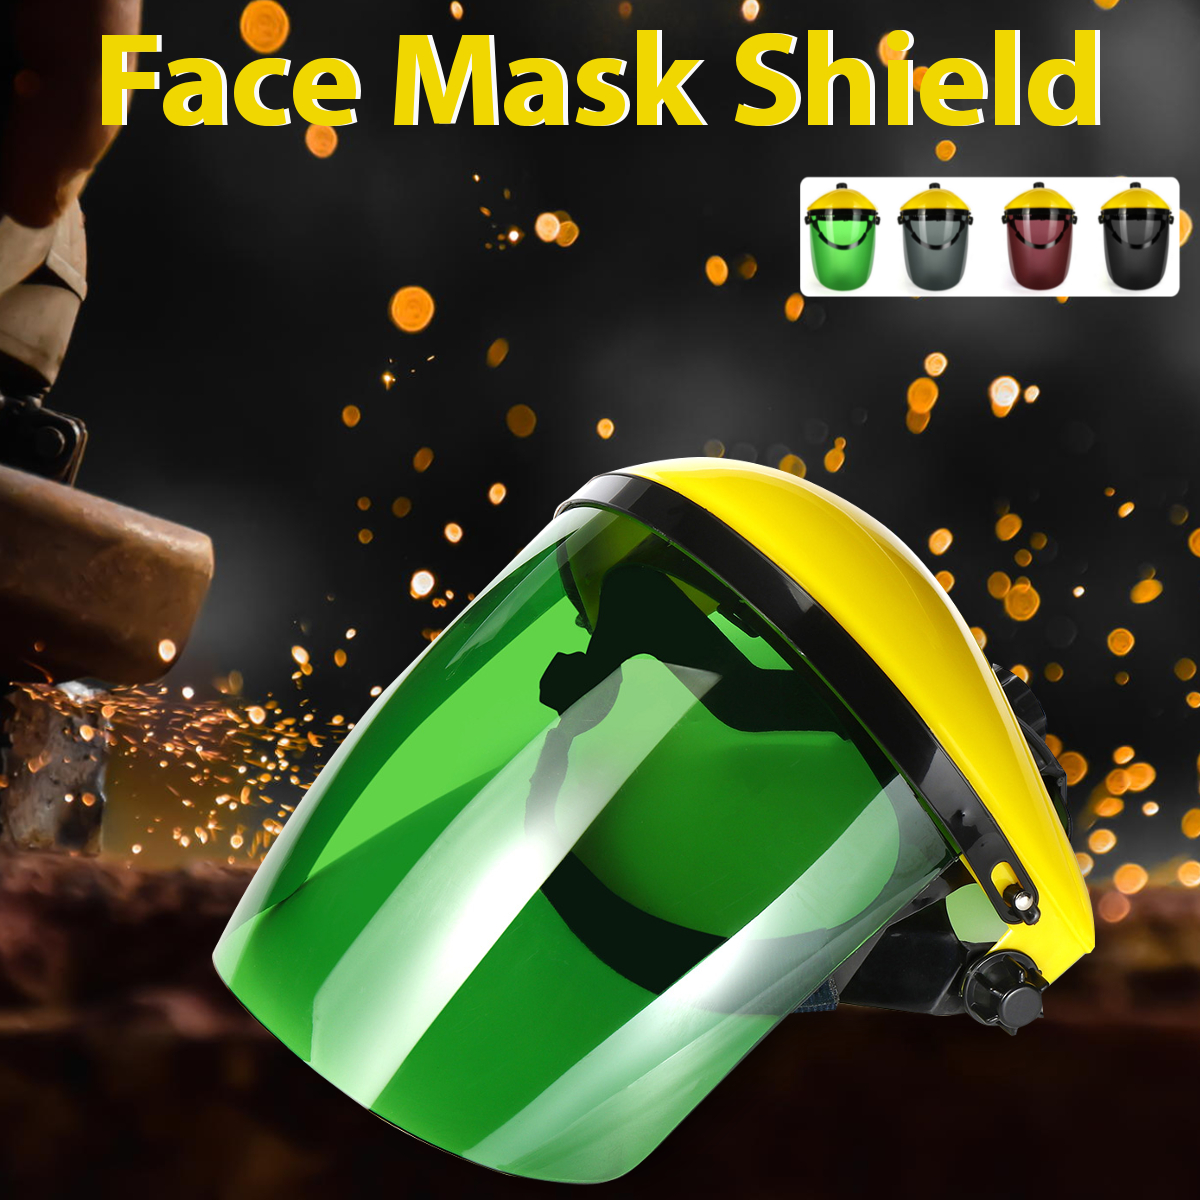 Welding-Mask-Clear-Face-Shield-Screen-Mask-Visors-Eye-Face-Protection-Scratch-Resistant-Lens-1298744-1